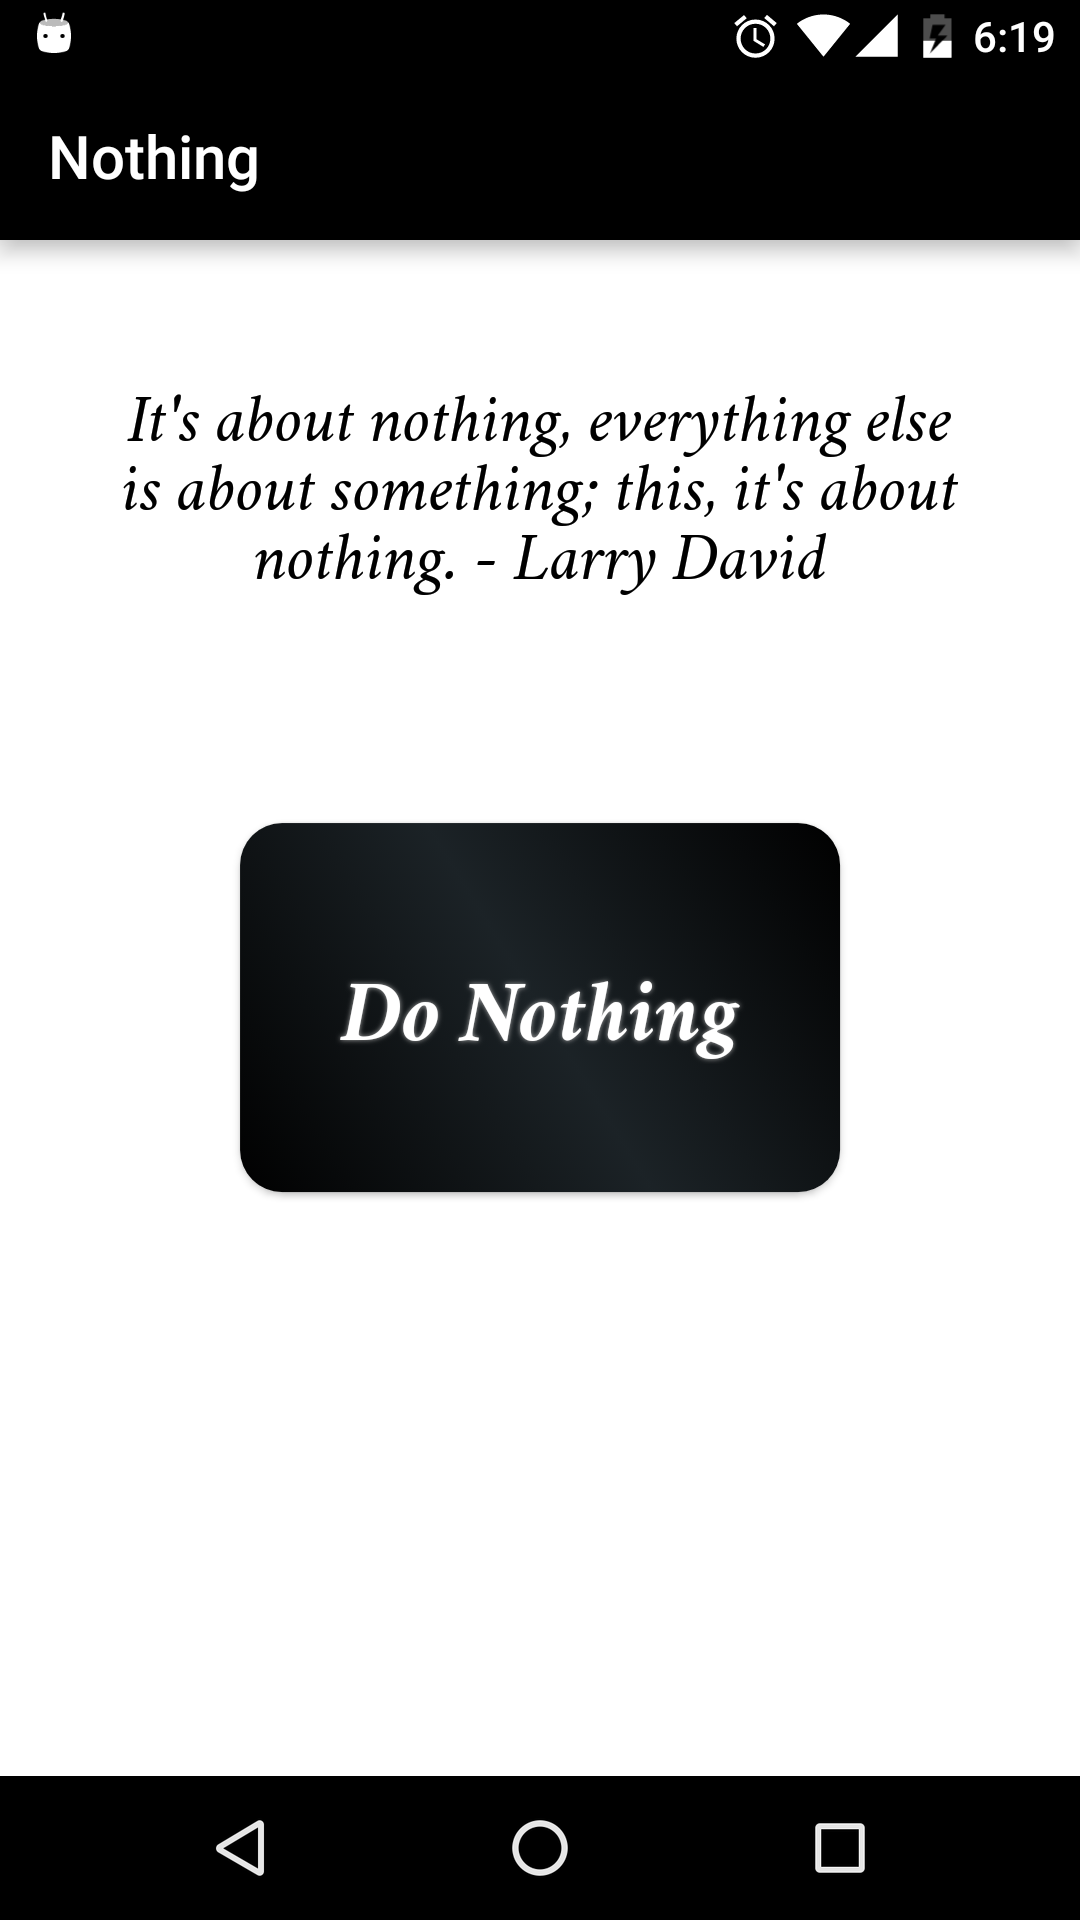 Android application Nothing, its about nothing !! screenshort